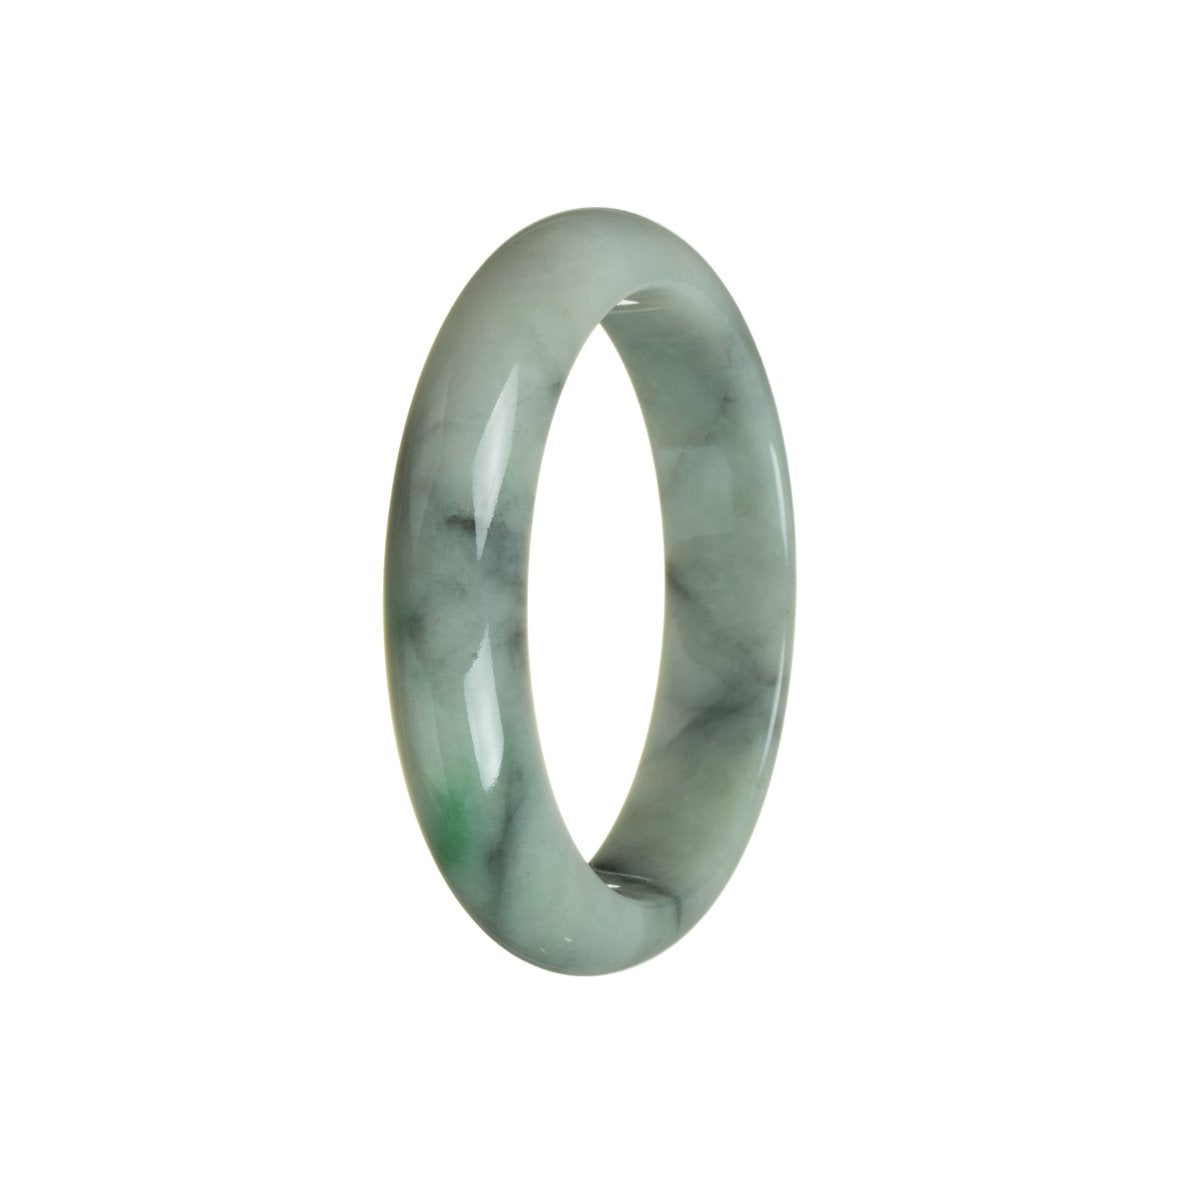 A close-up photo of a green and grey jade bangle with a half moon shape. Perfect for adding a touch of elegance to any outfit.